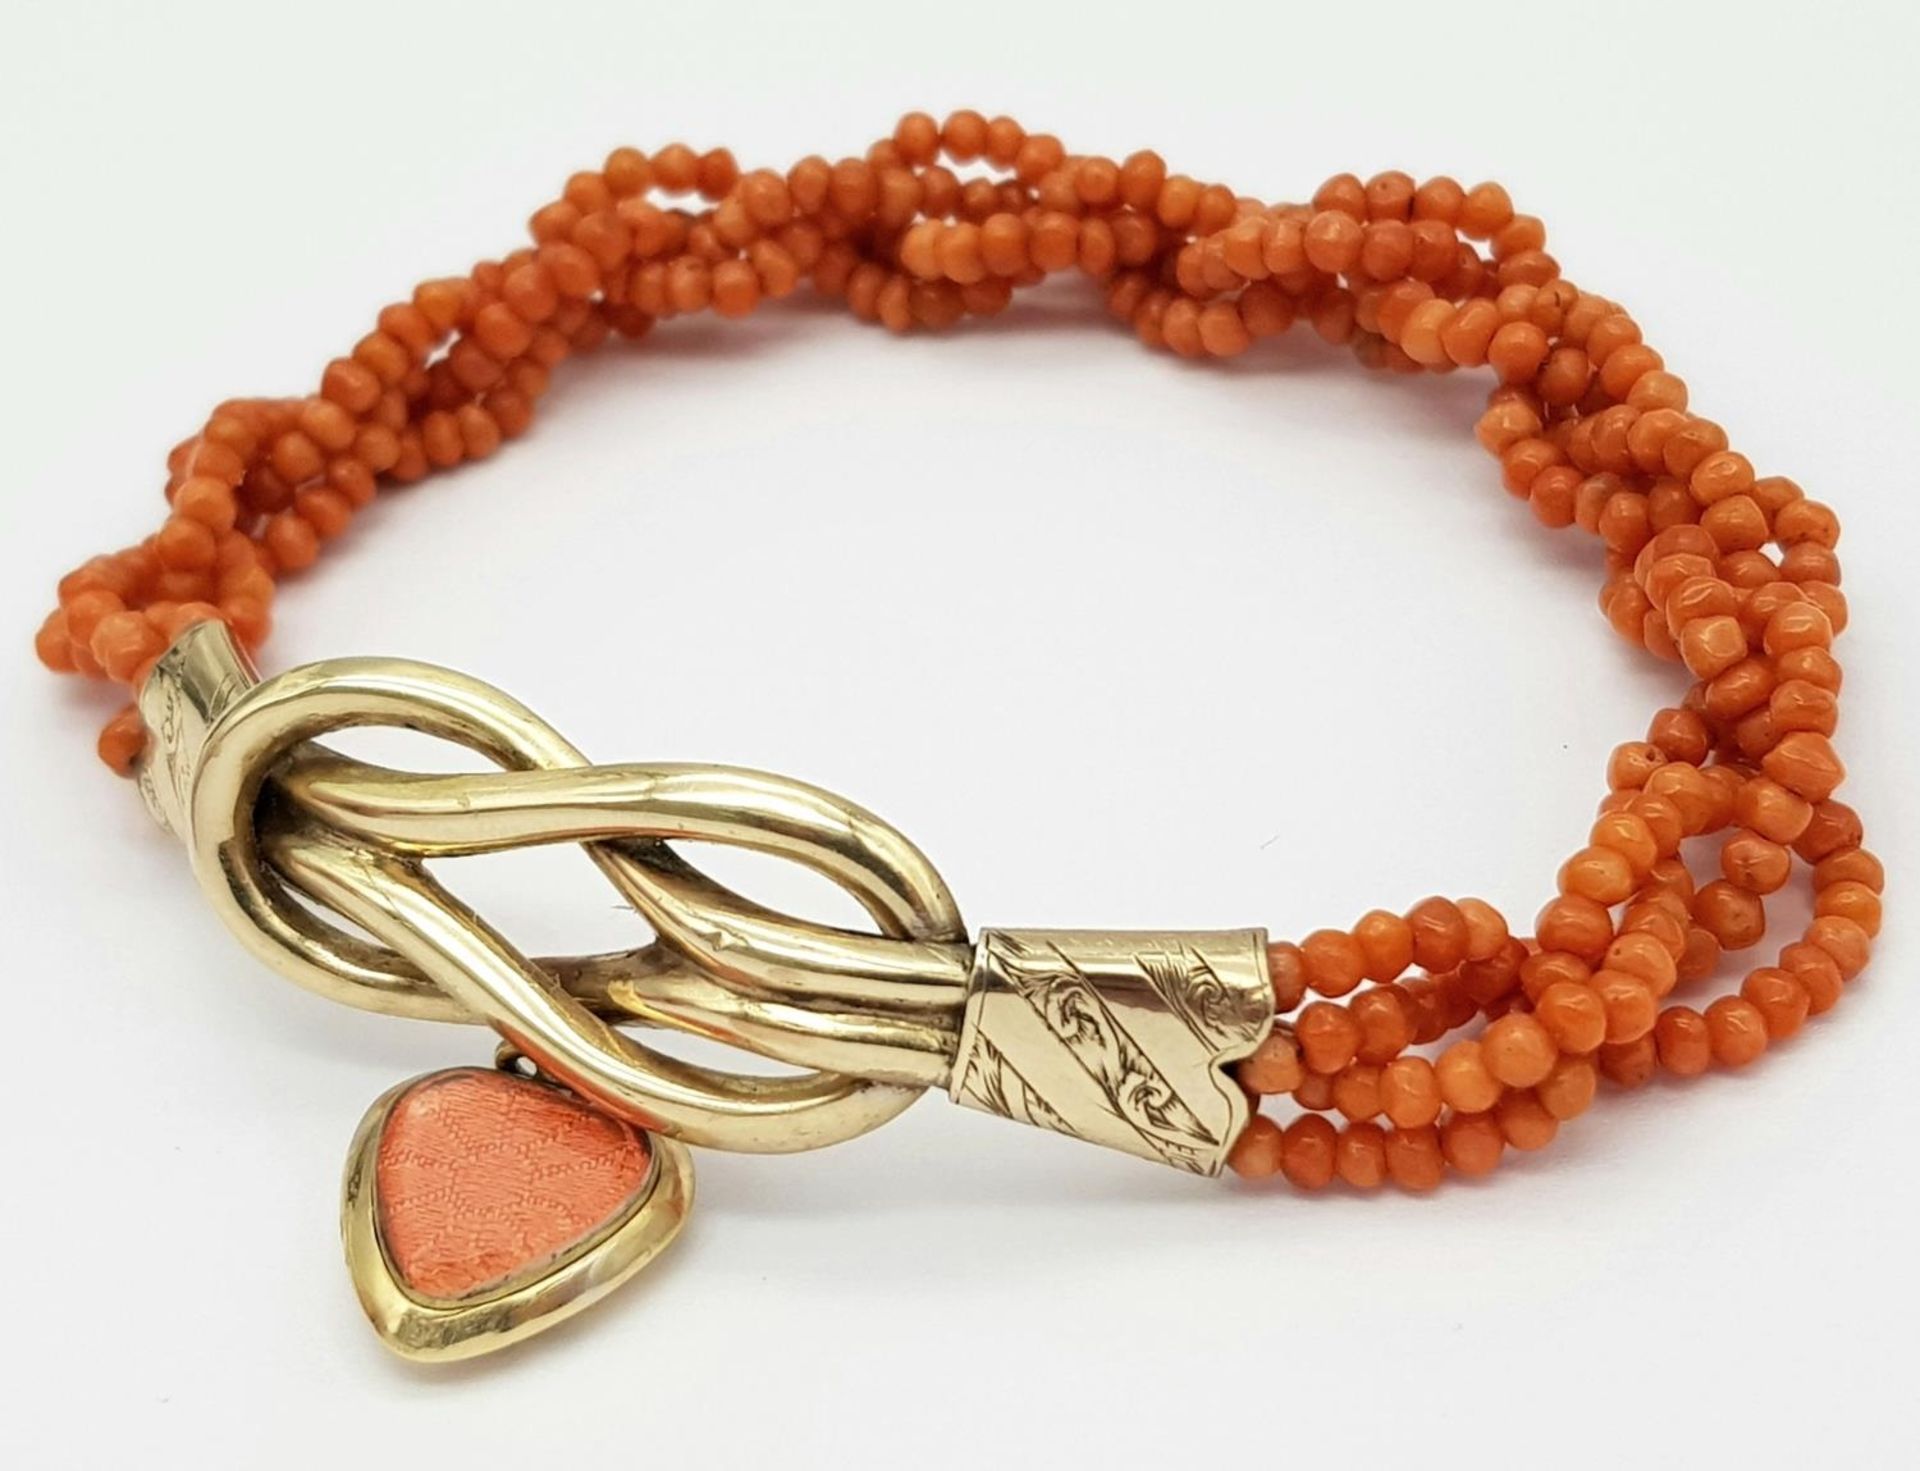 A Vintage 9K Gold and Red Coral Bracelet with Heart Locket. 14g total weight.